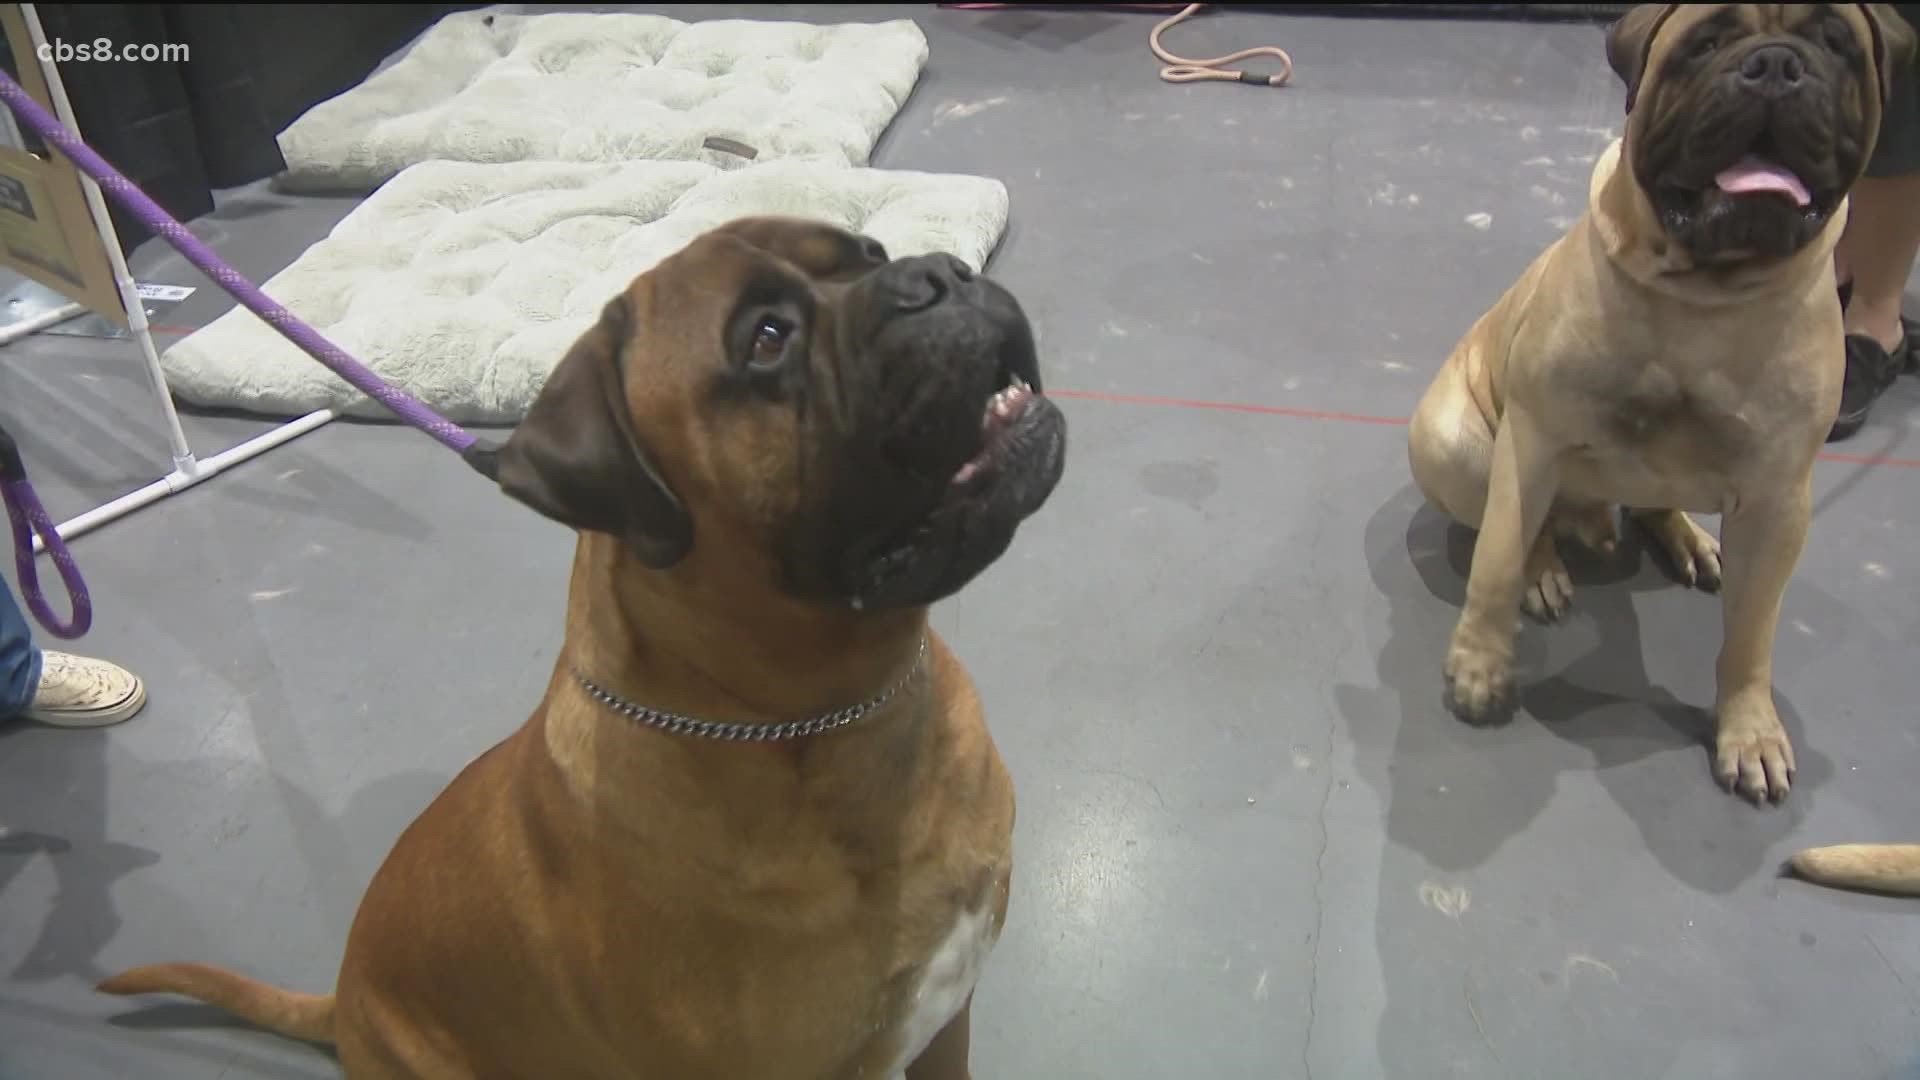 Dogs of all shapes and sizes will be in the Convention Center this weekend